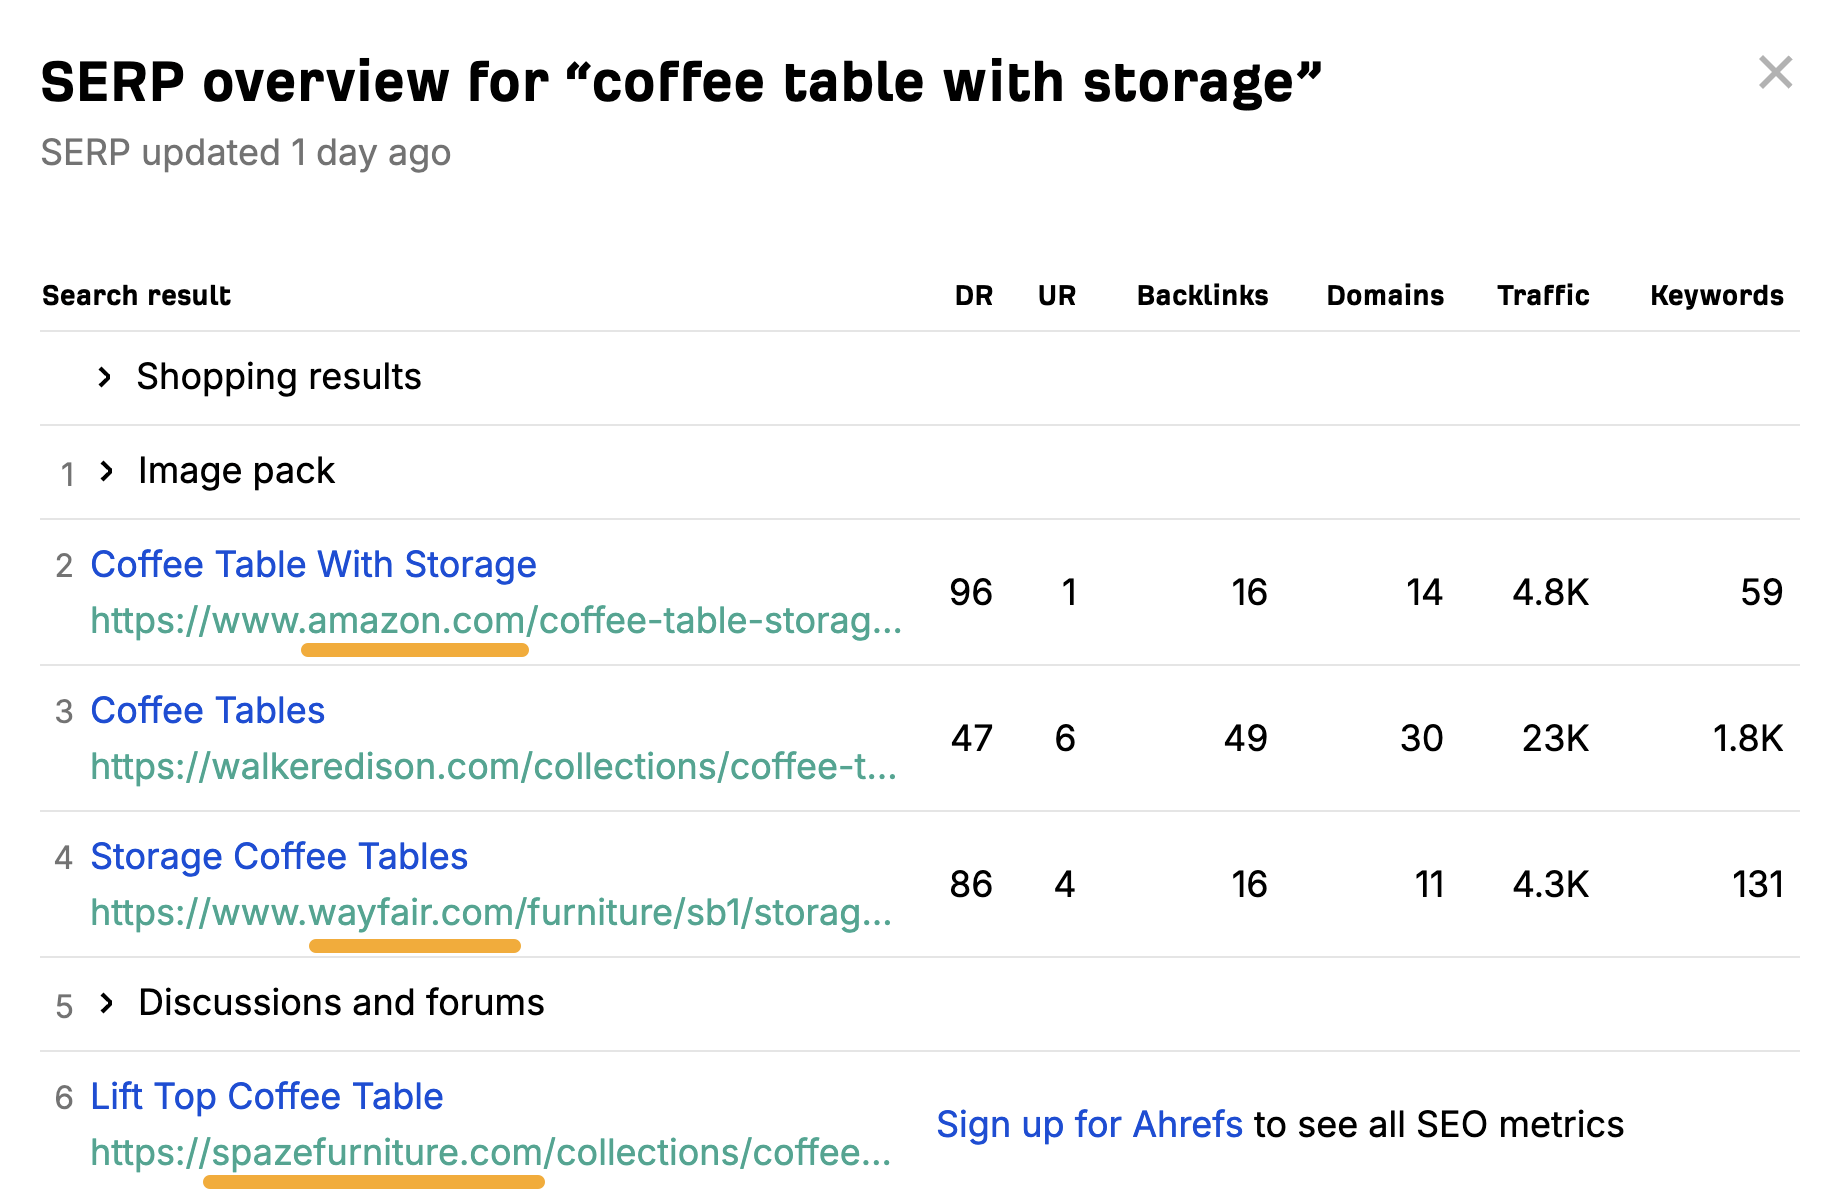 SERP overview for "coffee table with storage"